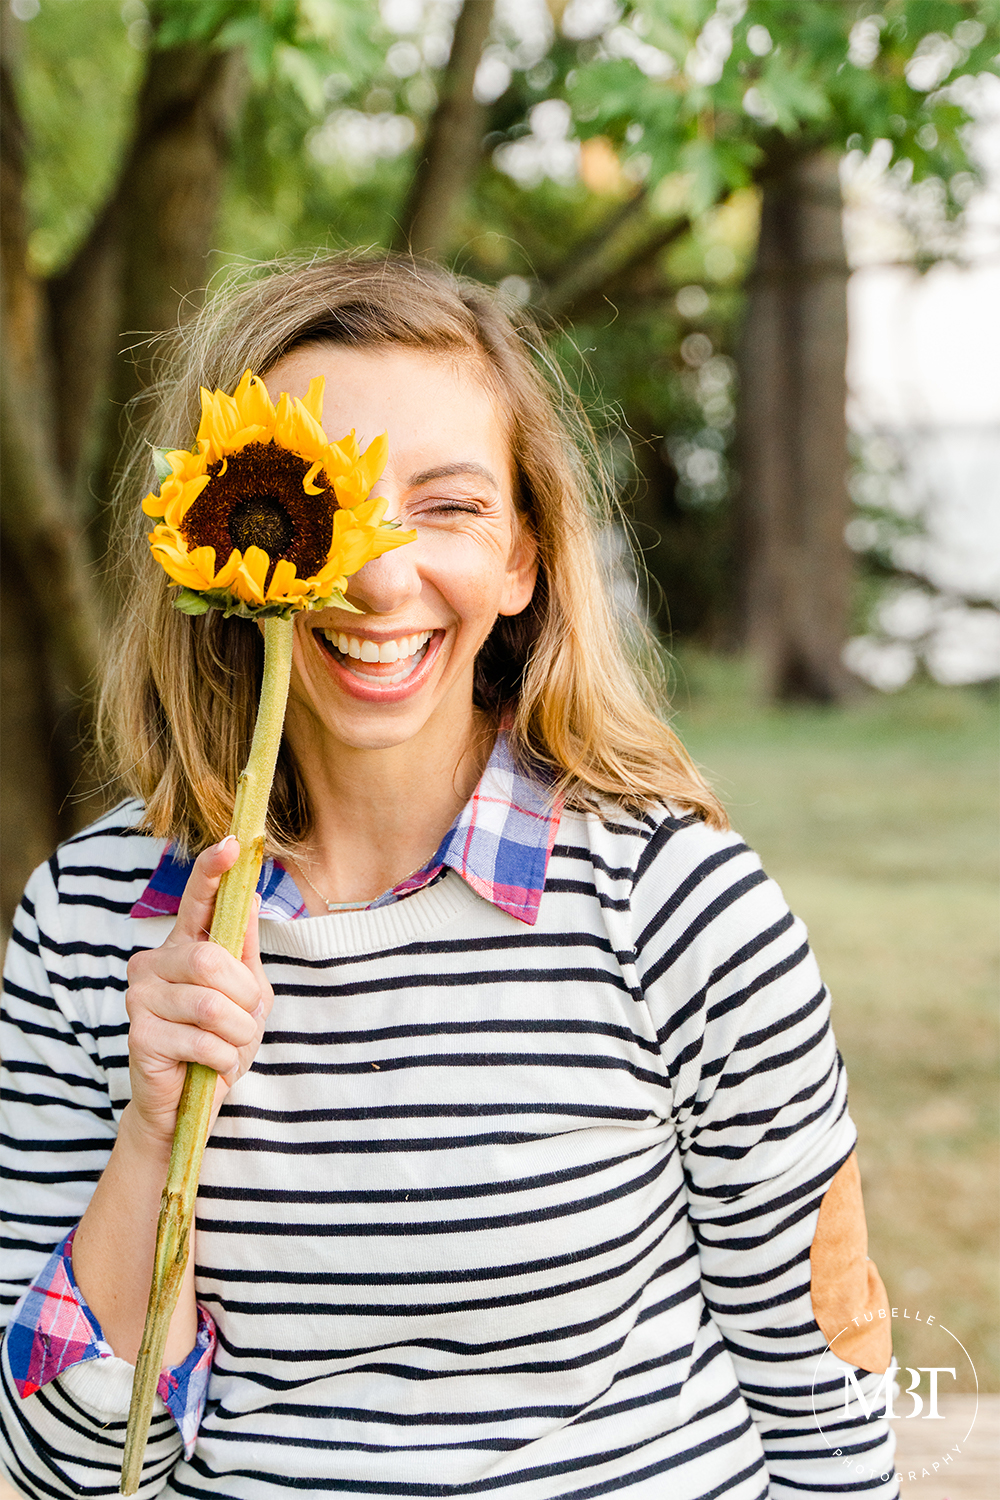 lifestyle session - fashion blogger holding a sunflower, taken at Jones Point Park by a Northern Virginia branding photographer